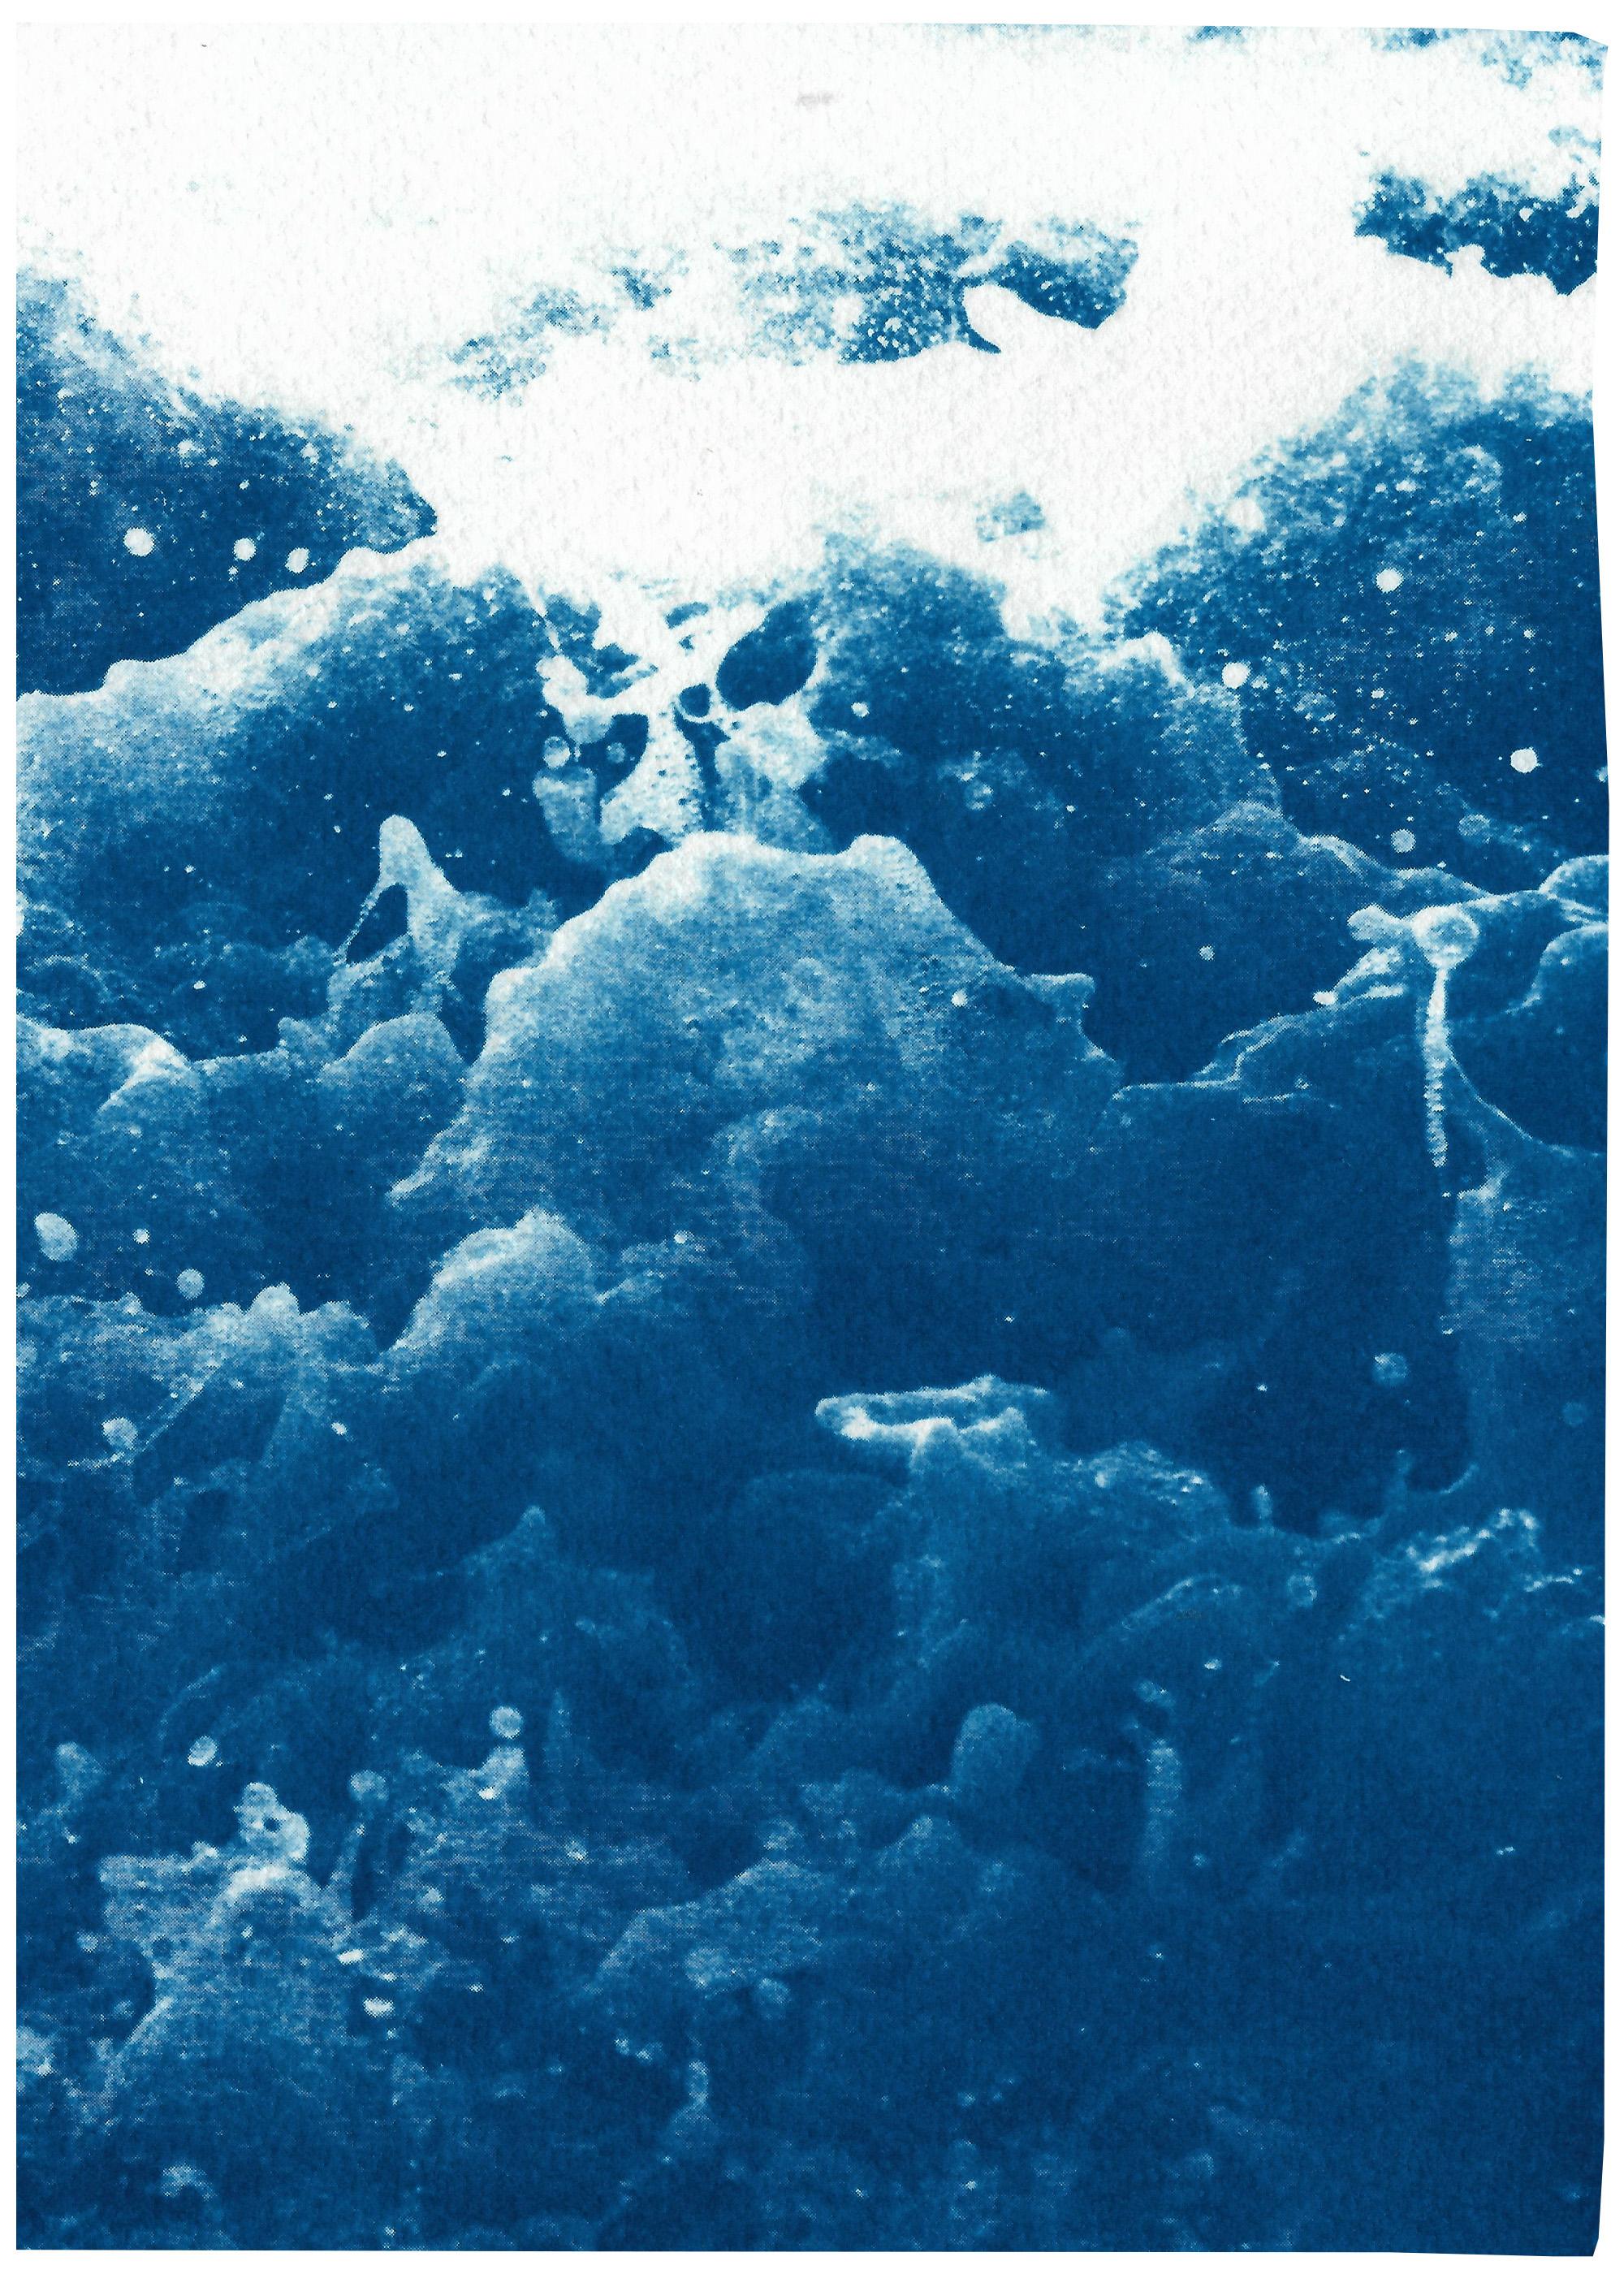 Tempestuous Tidal in Blue, Stormy Seascape Diptych, Cyanotype Print, Maker, Blue 3